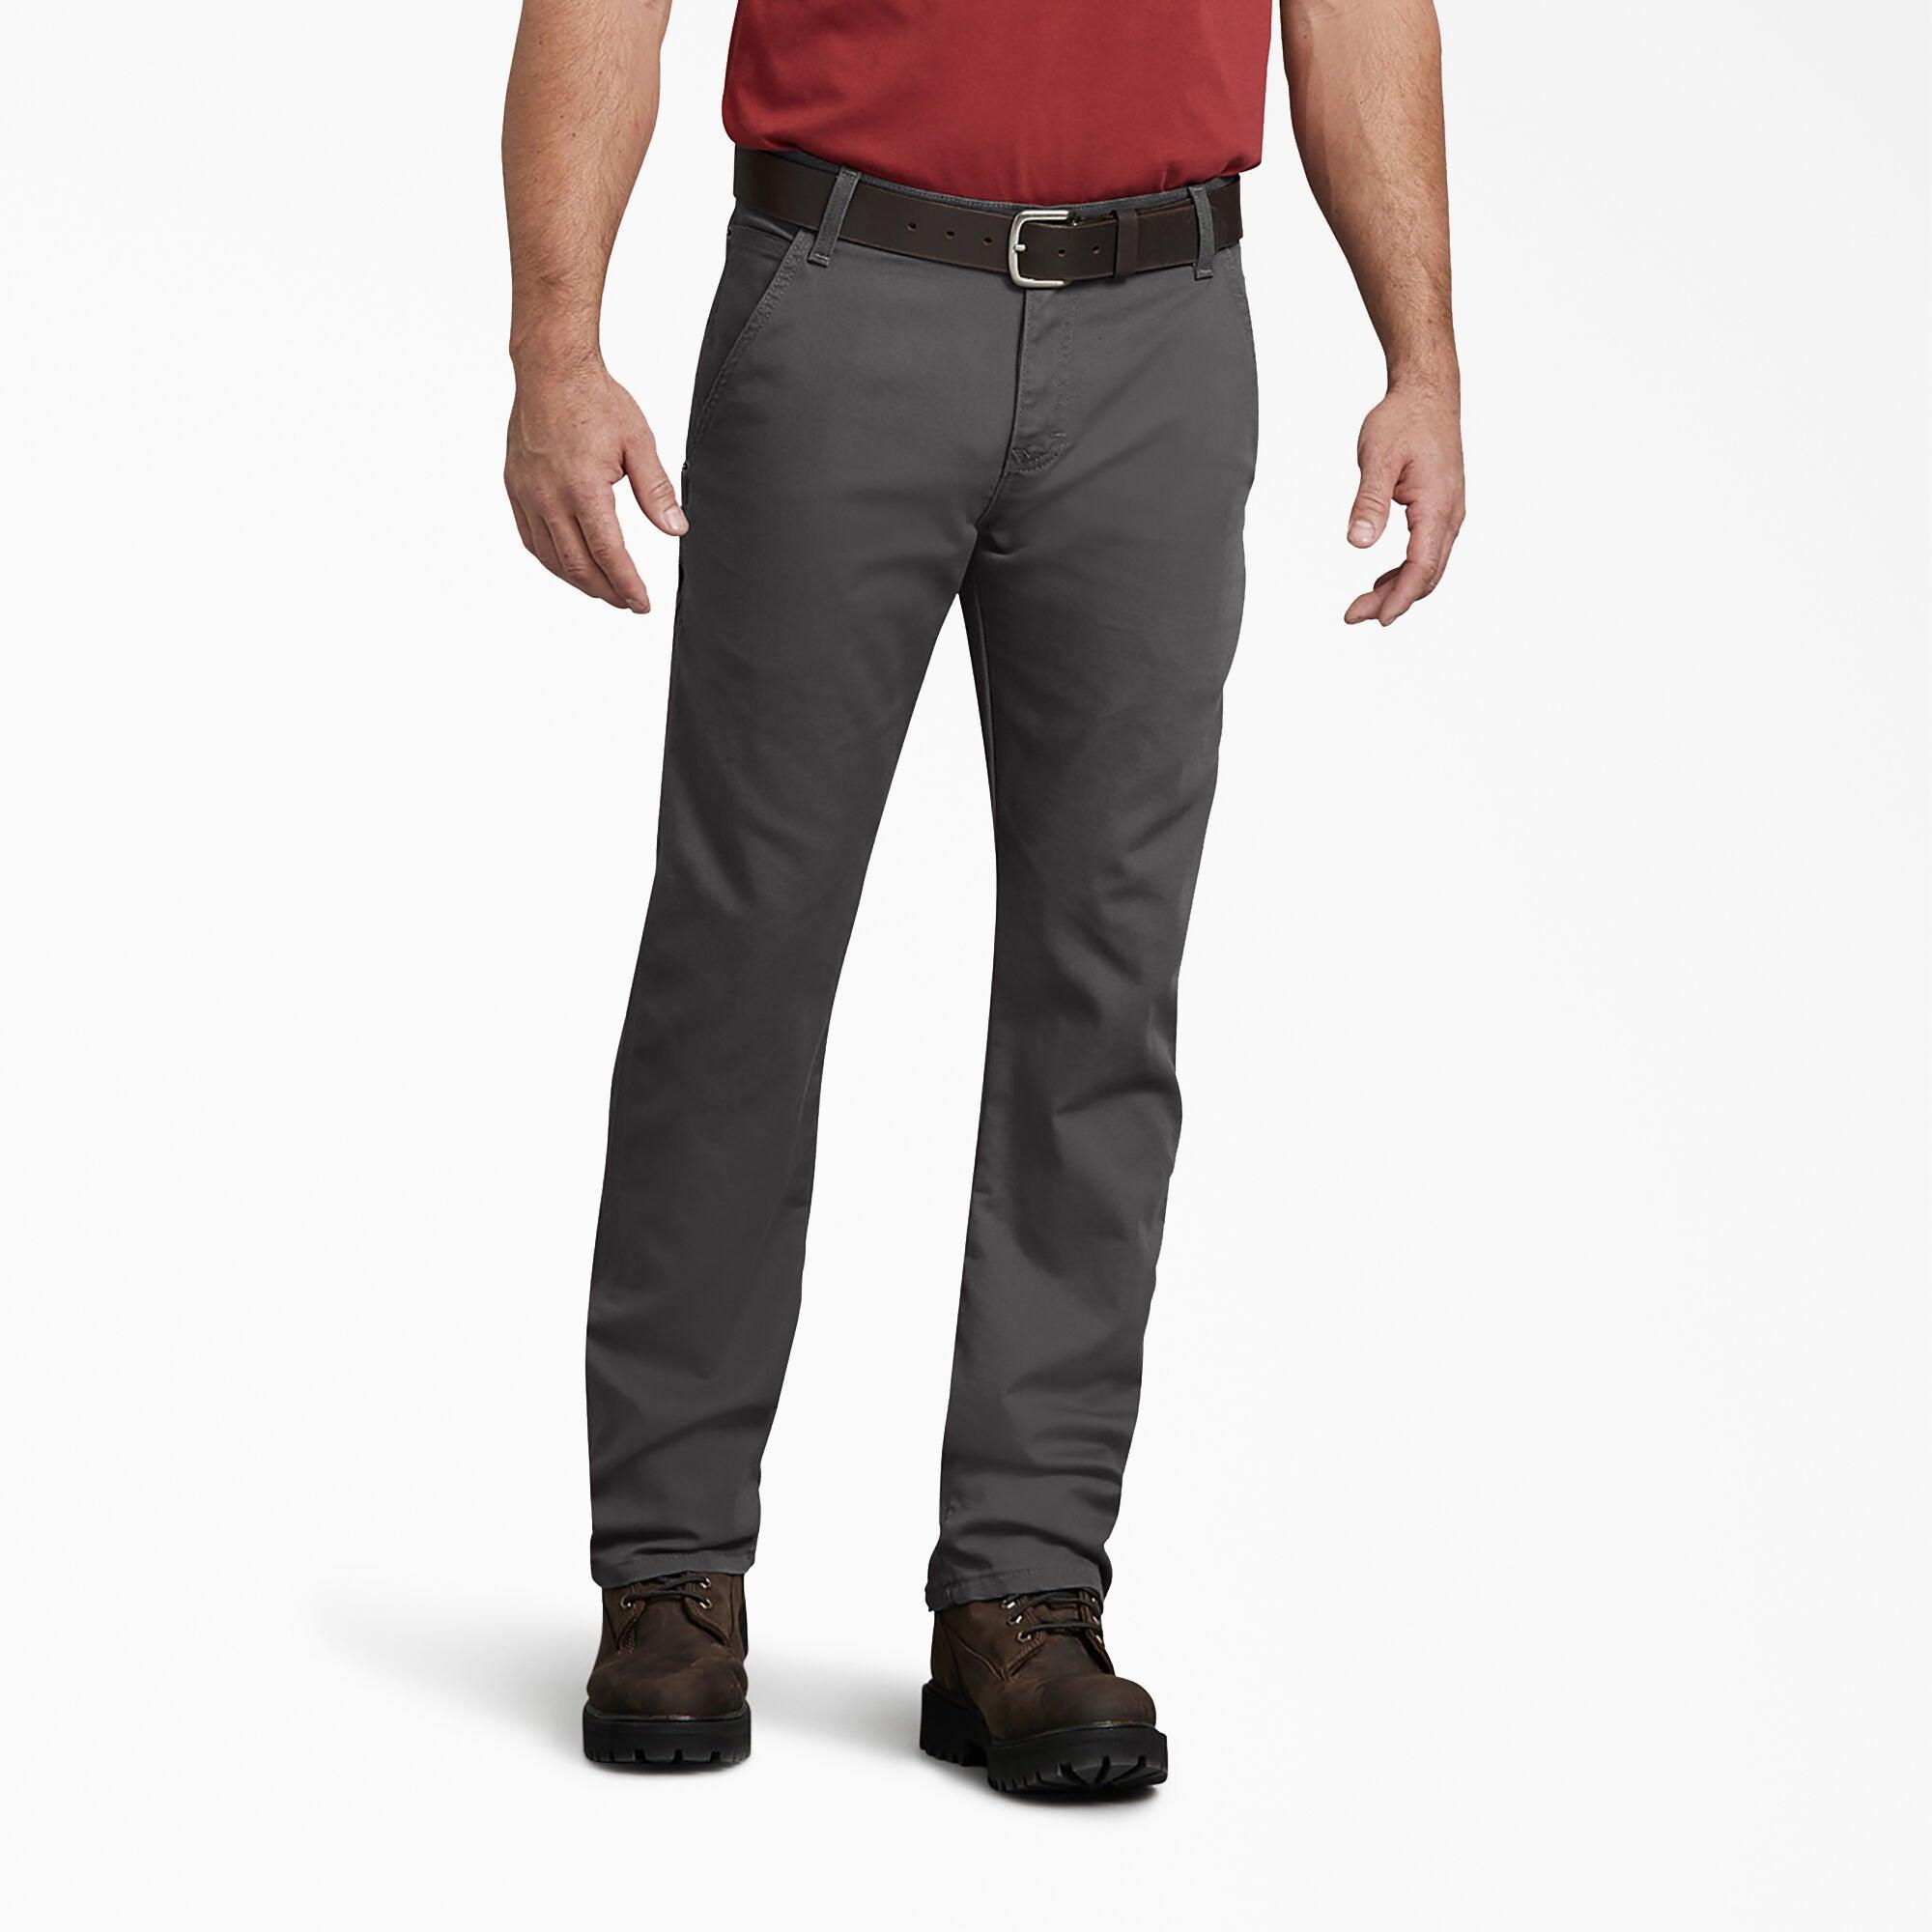 FLEX Regular Fit Duck Carpenter Pants, Stonewashed Gray - Purpose-Built / Home of the Trades